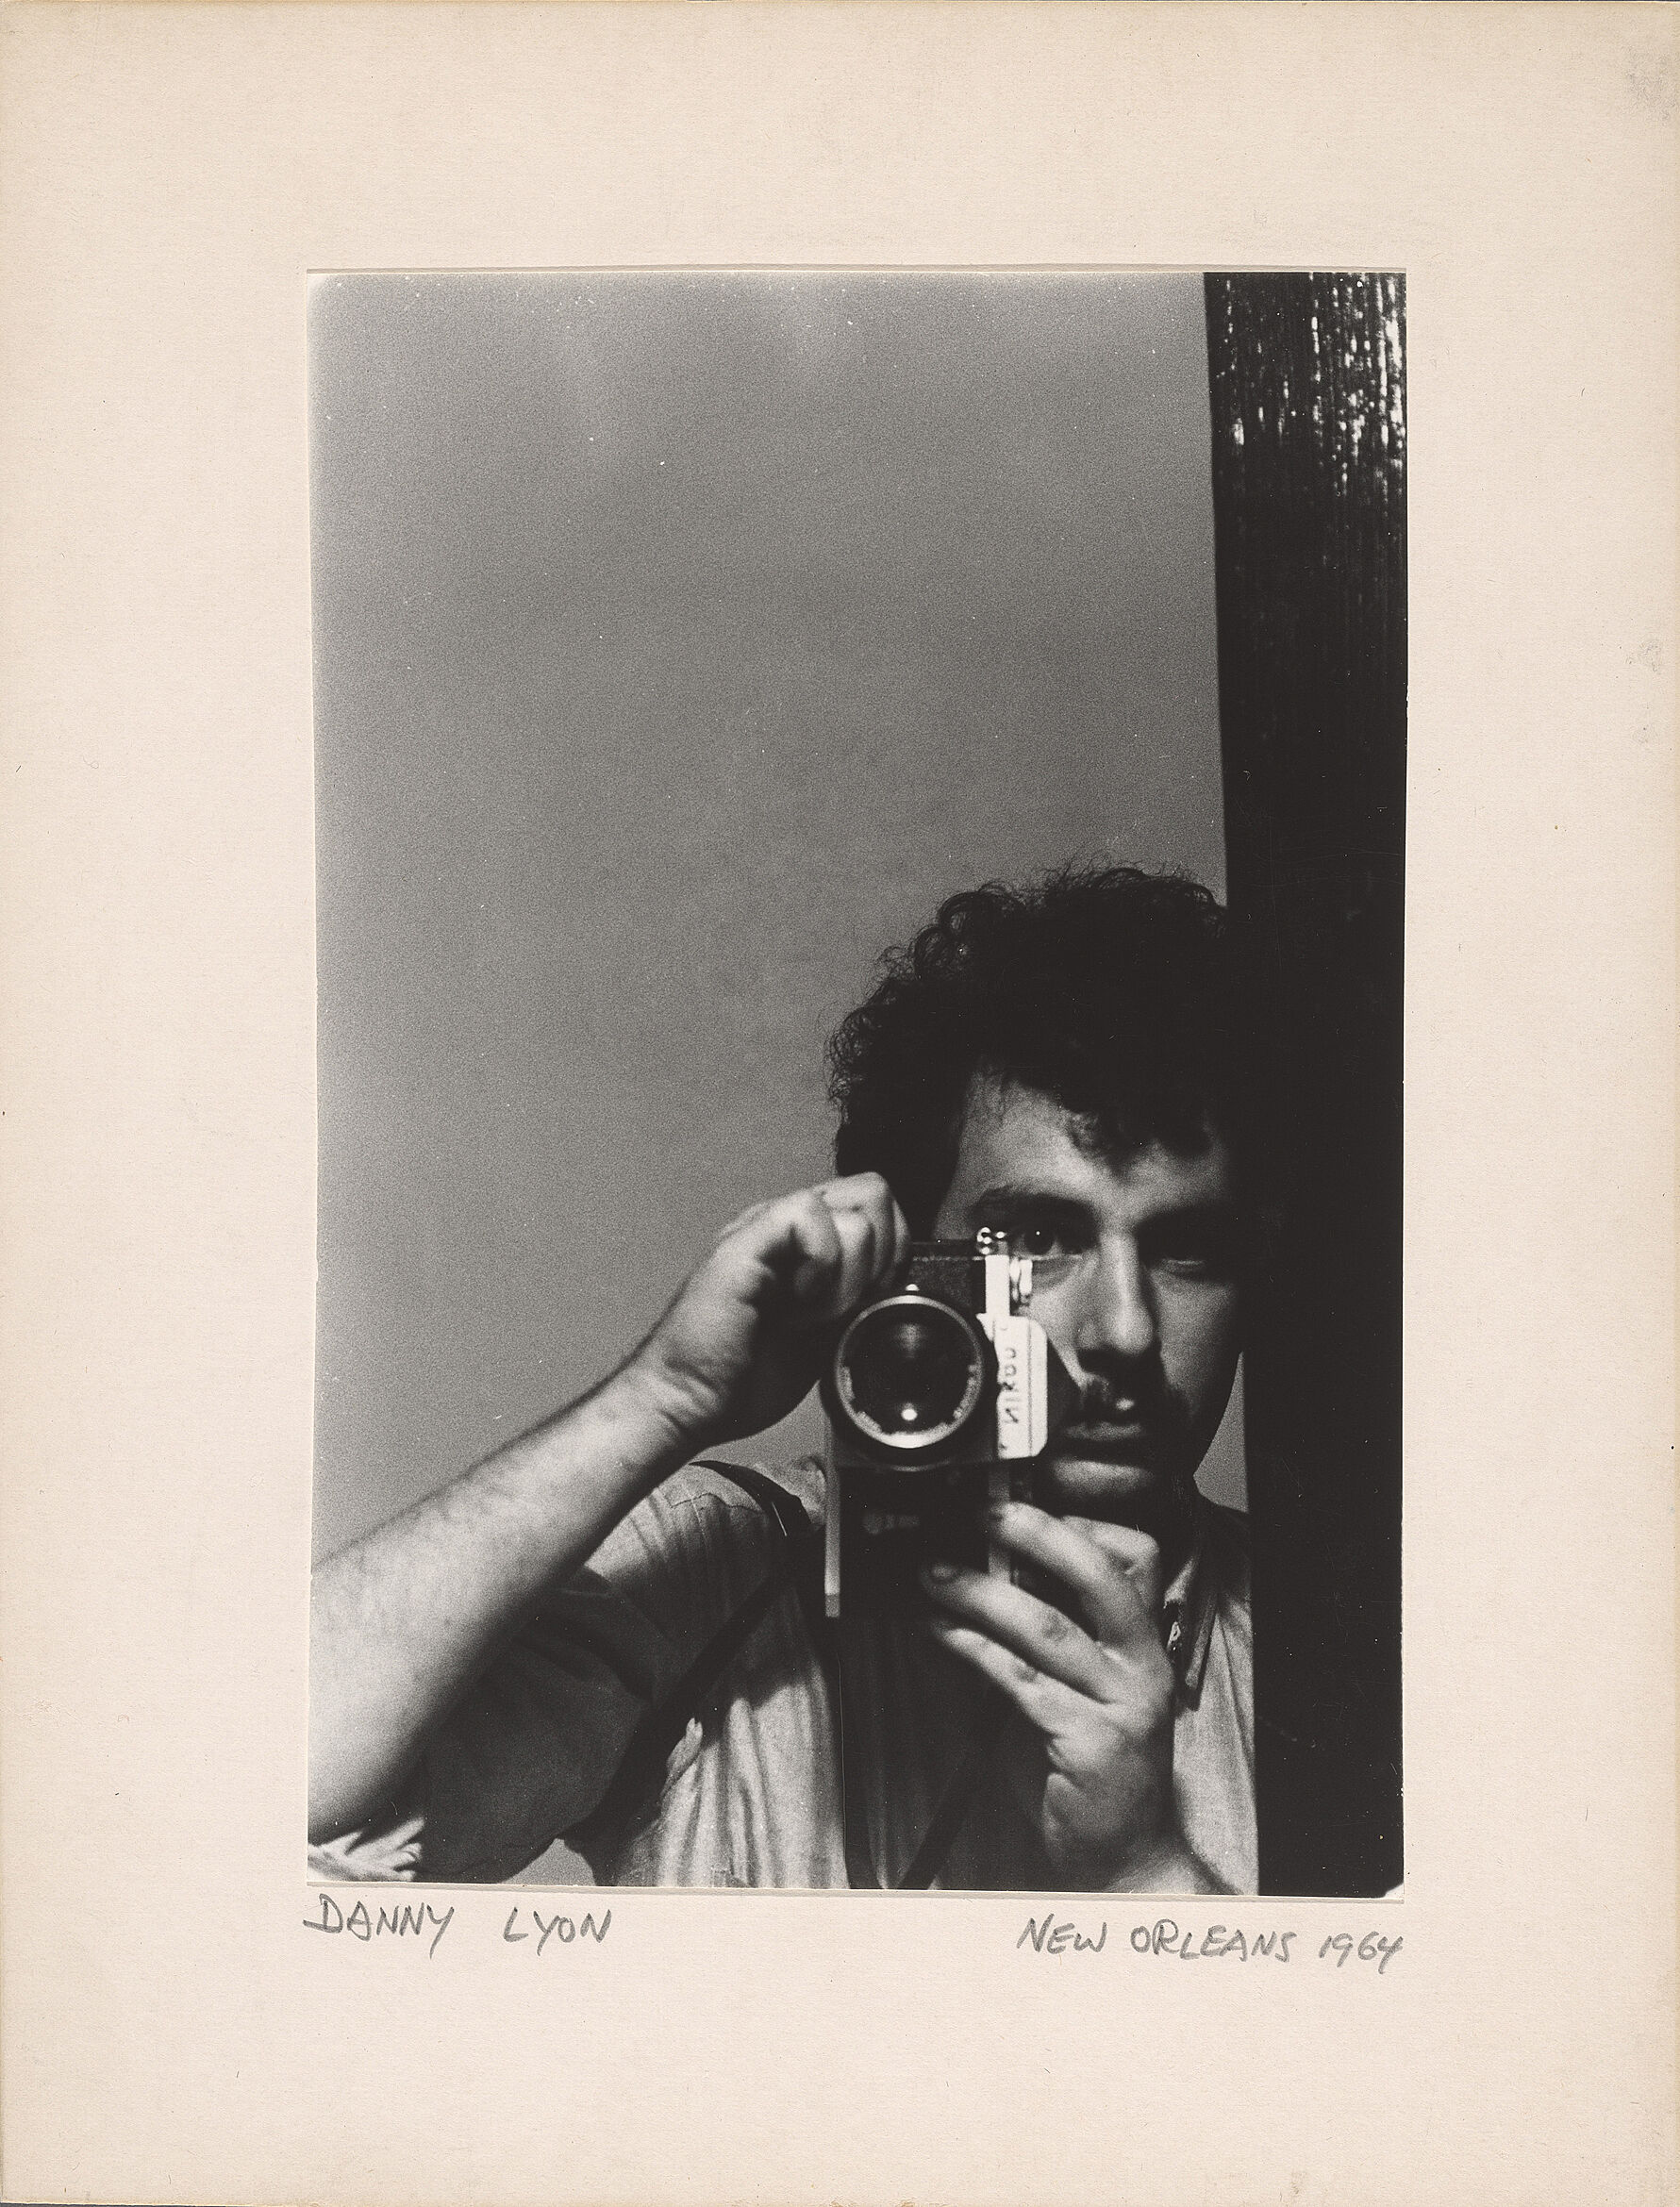 The artist Danny Lyon holds a camera for a self portrait.